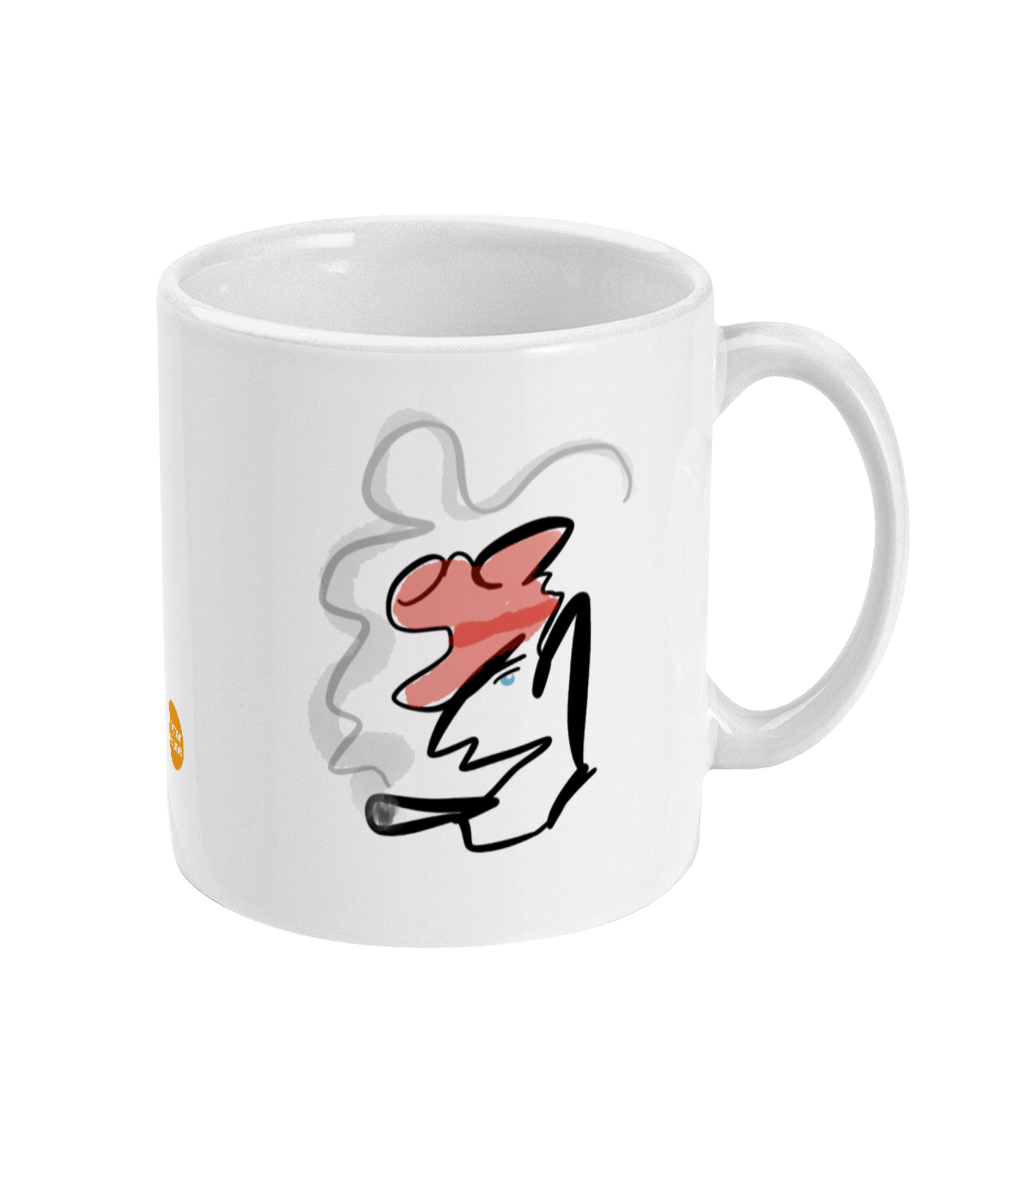 Monsieur Gaulois design coffee mug by Hector and Bone Right View